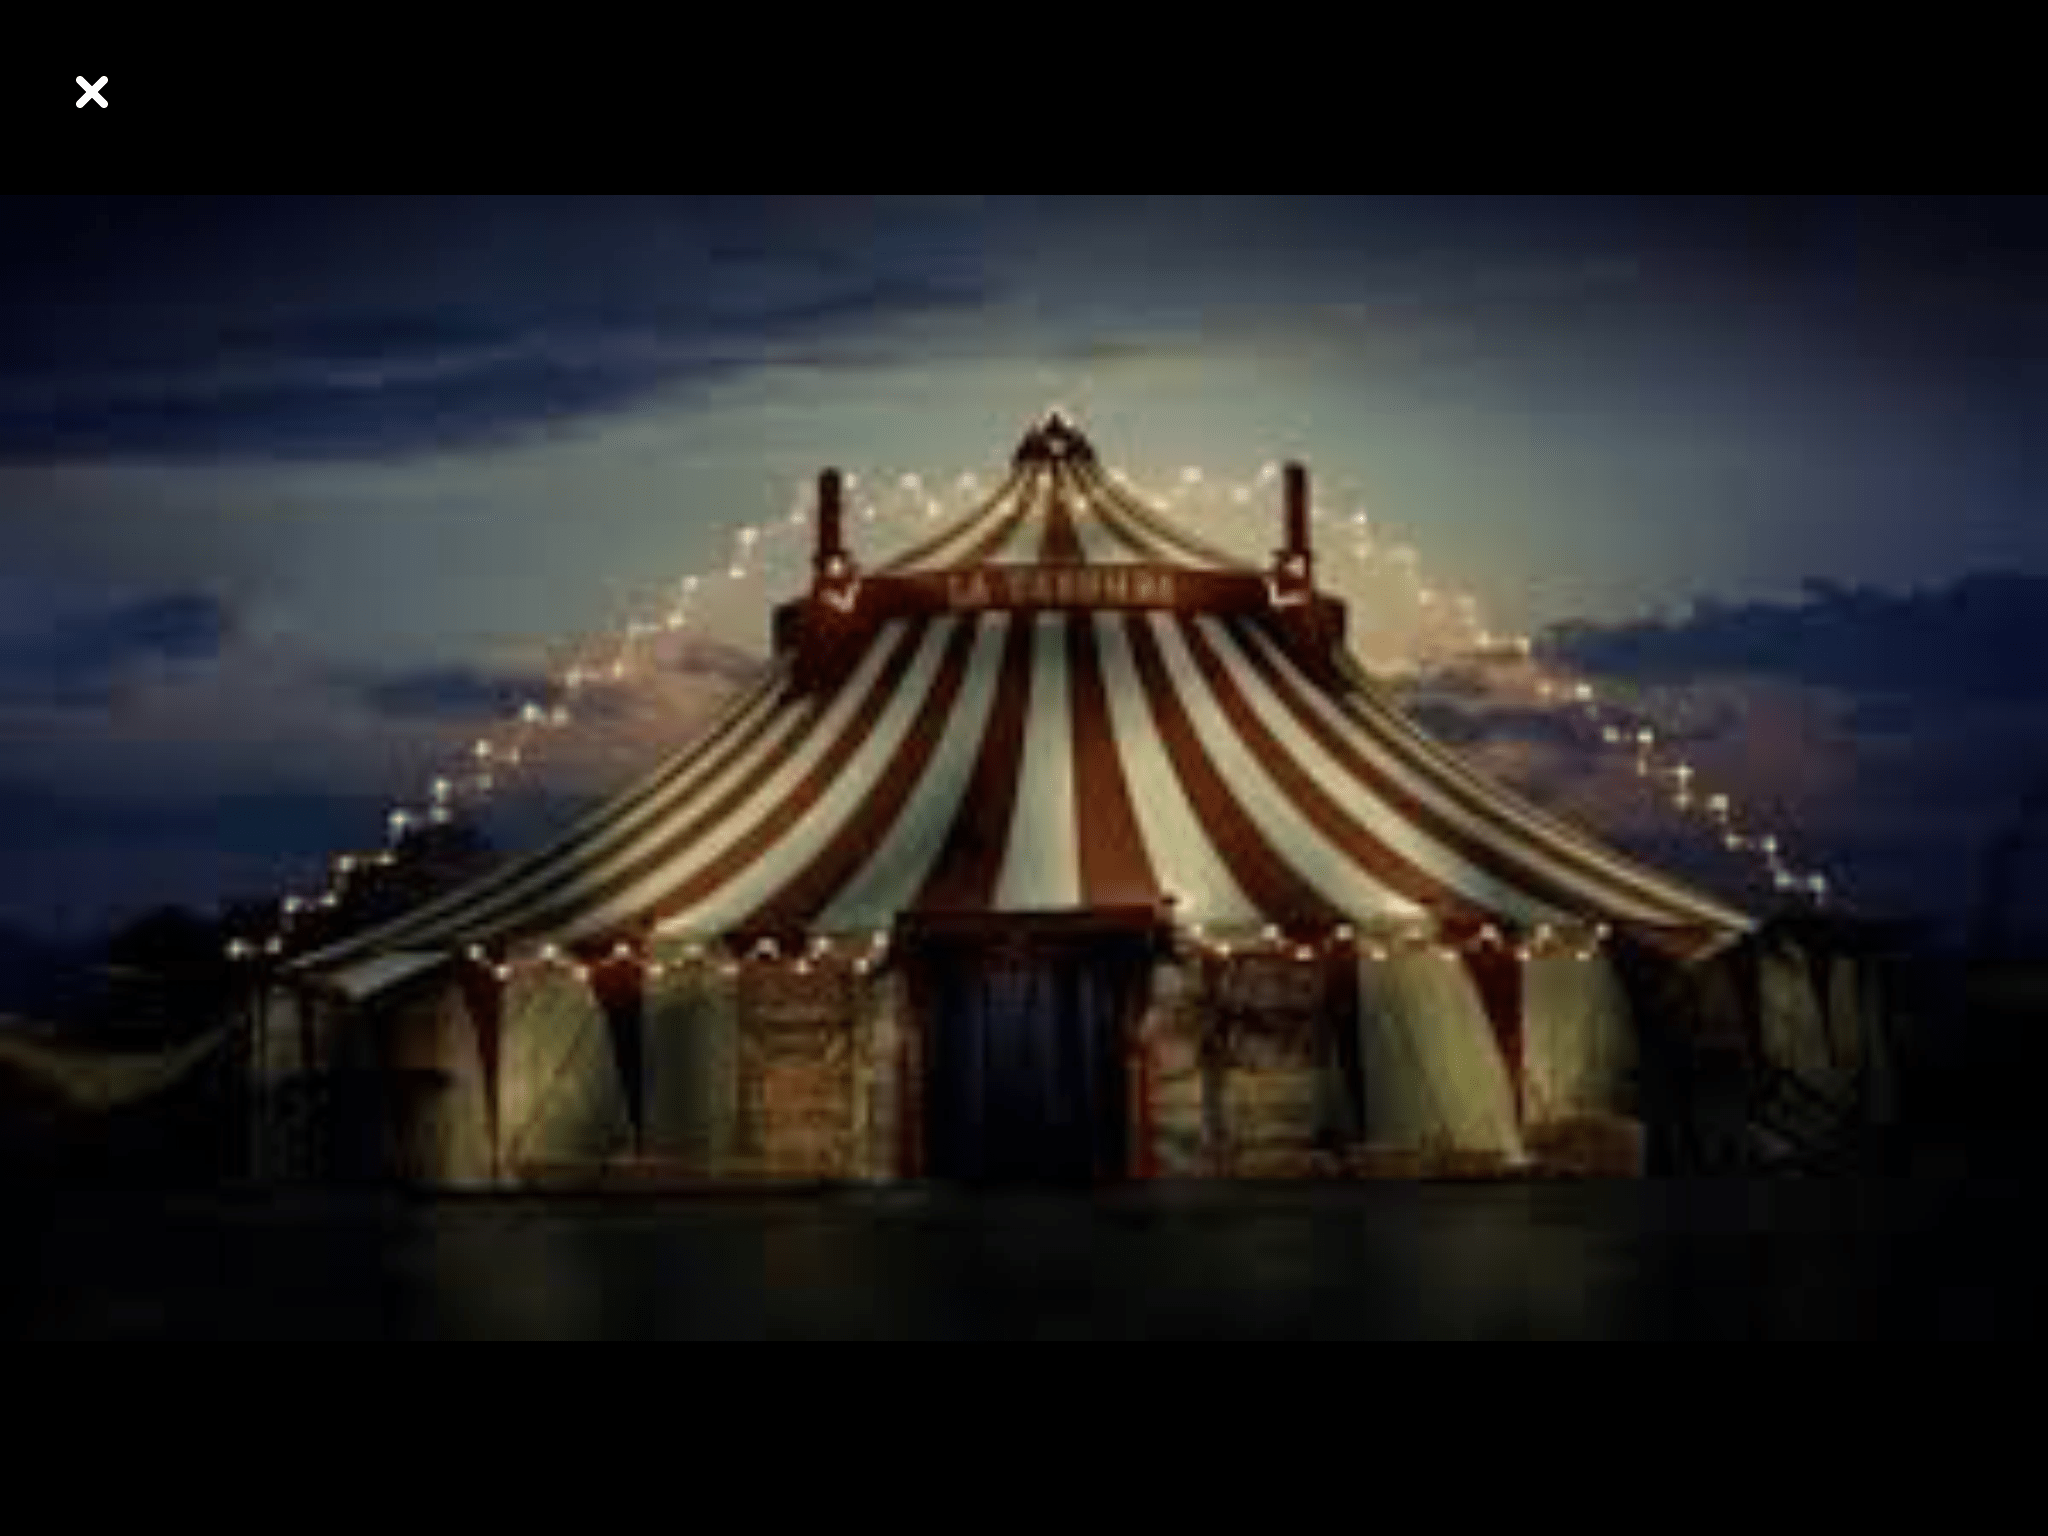 Night Circus Wallpapers - Top Free Night Circus Backgrounds ...